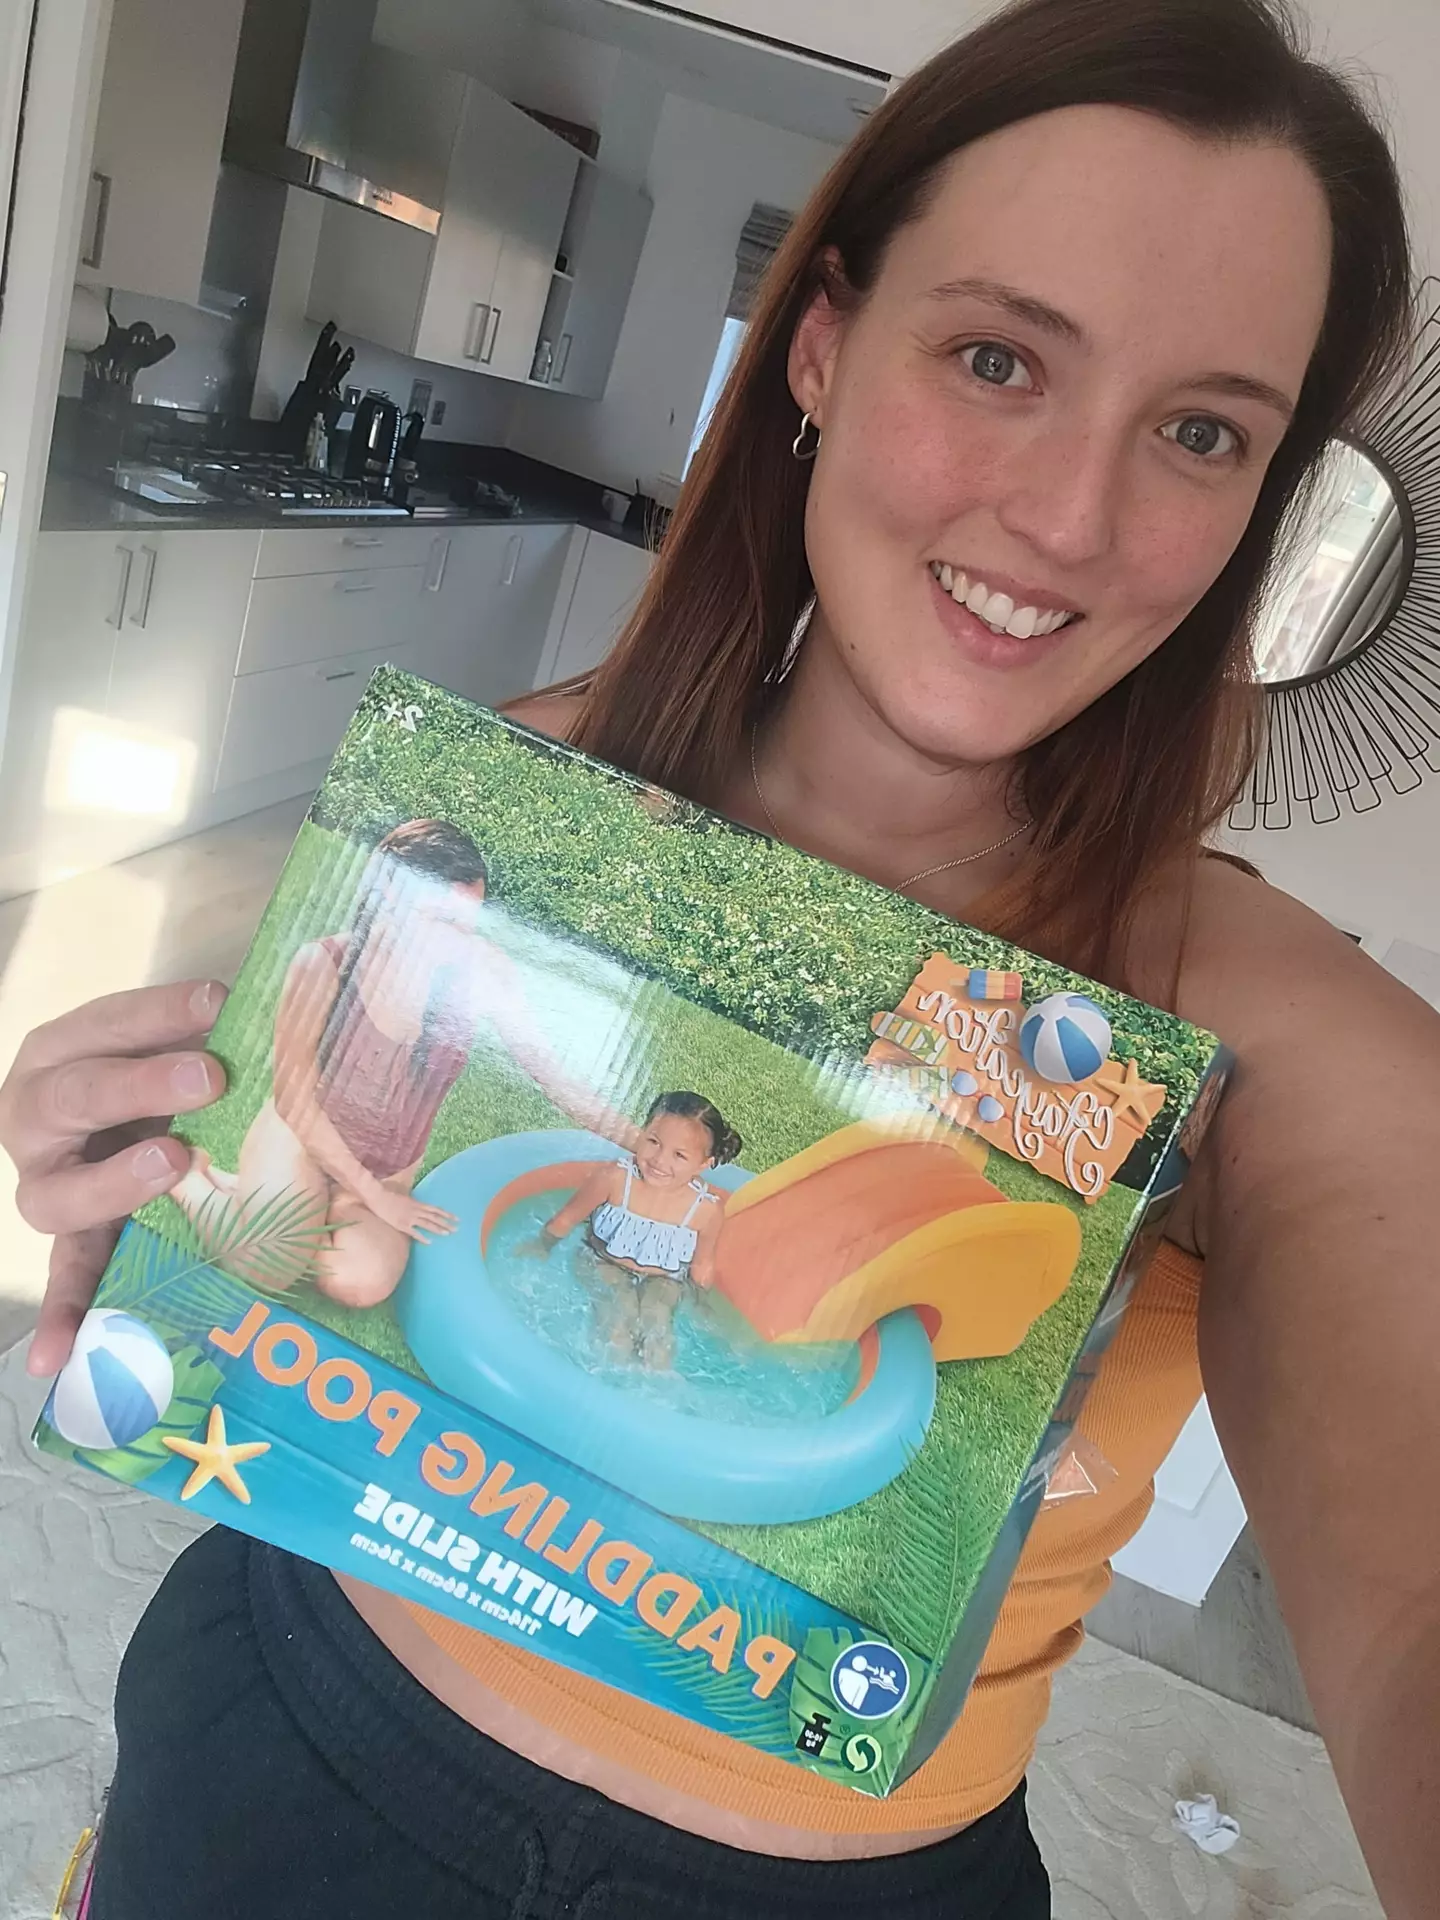 A mum has been left red-faced after buying a 'doll-sized' paddling pool from B&M.